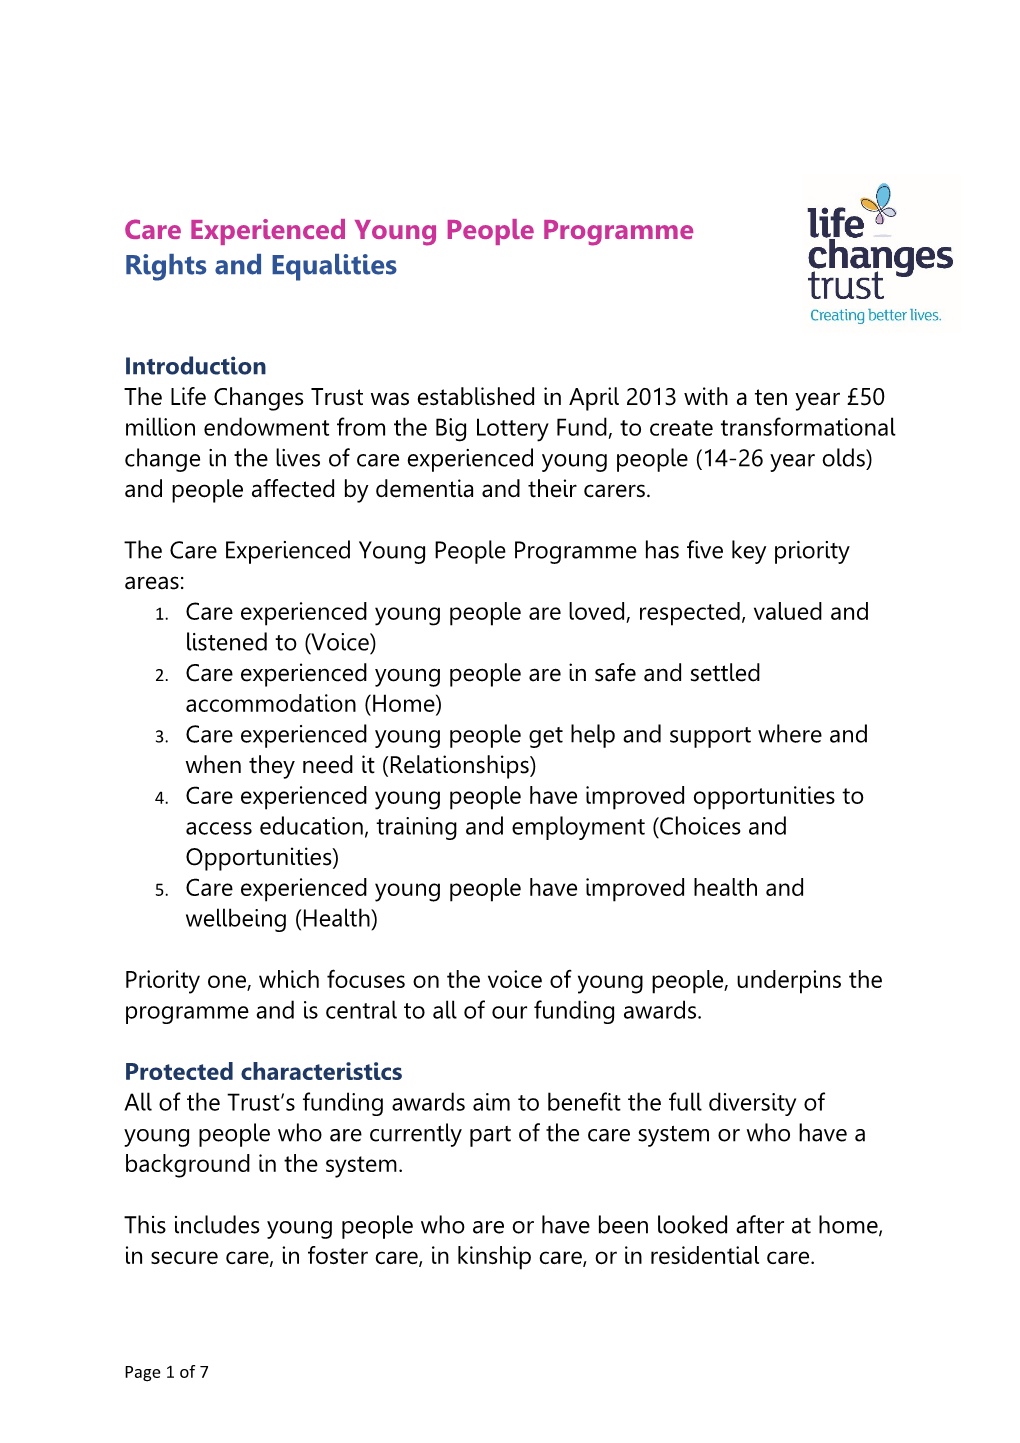 Care Experienced Young People Programme